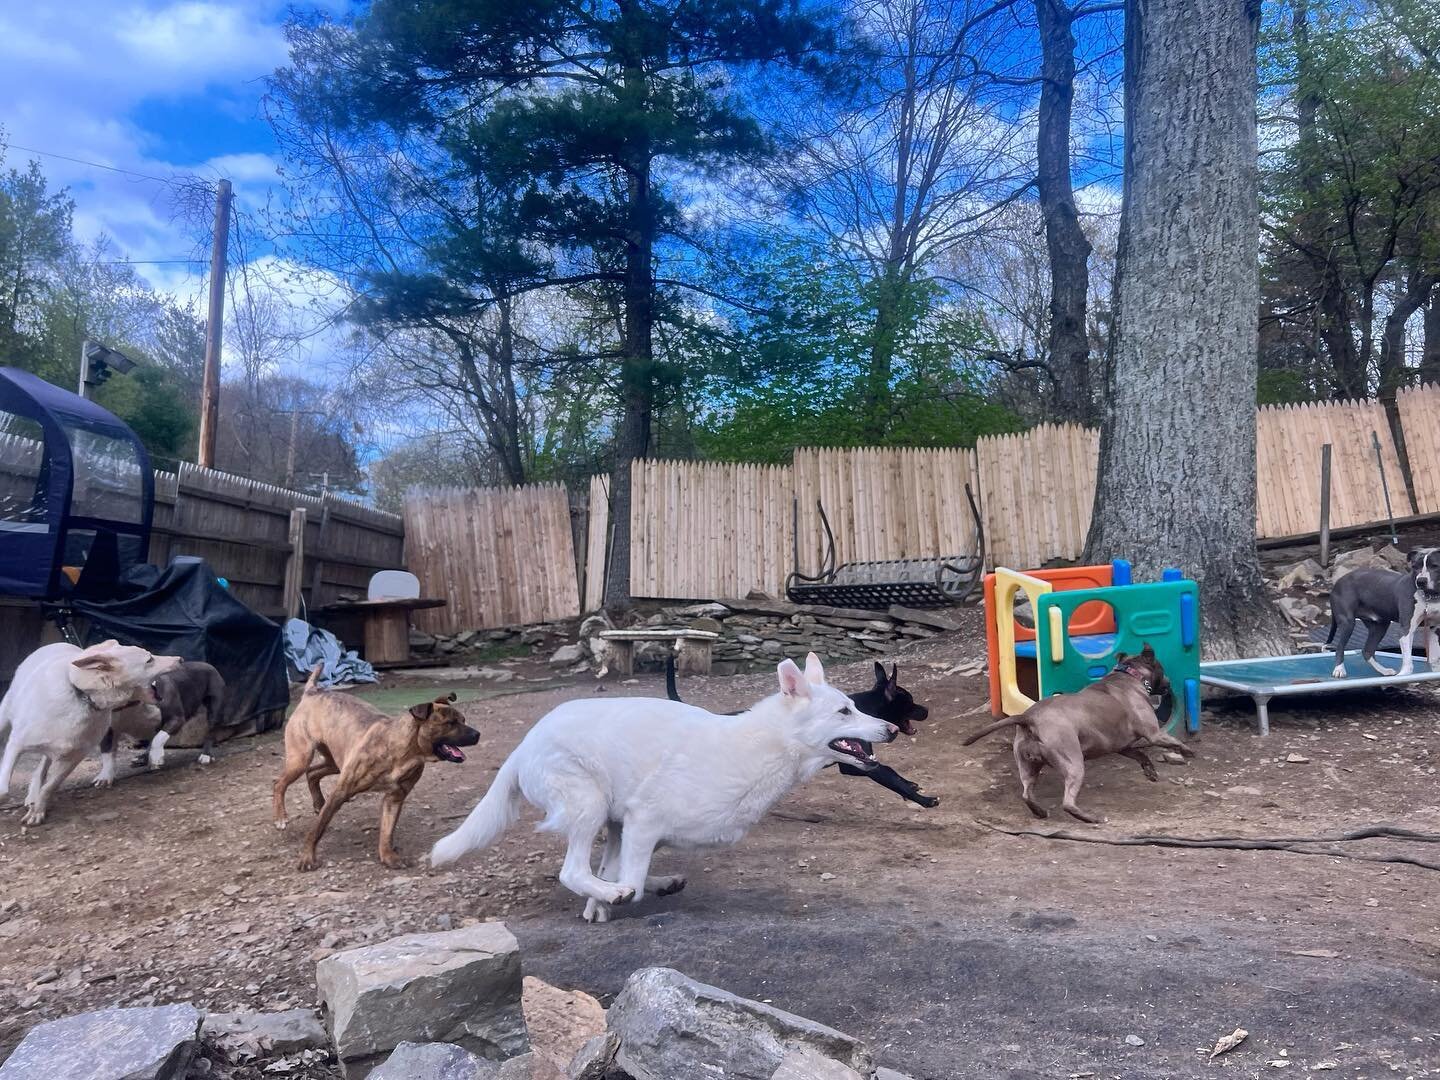 Today we celebrated clear skies! ☀️A proud place of refuge for the lost &amp; wild 🐾 https://www.bighairanimalrescue.com/